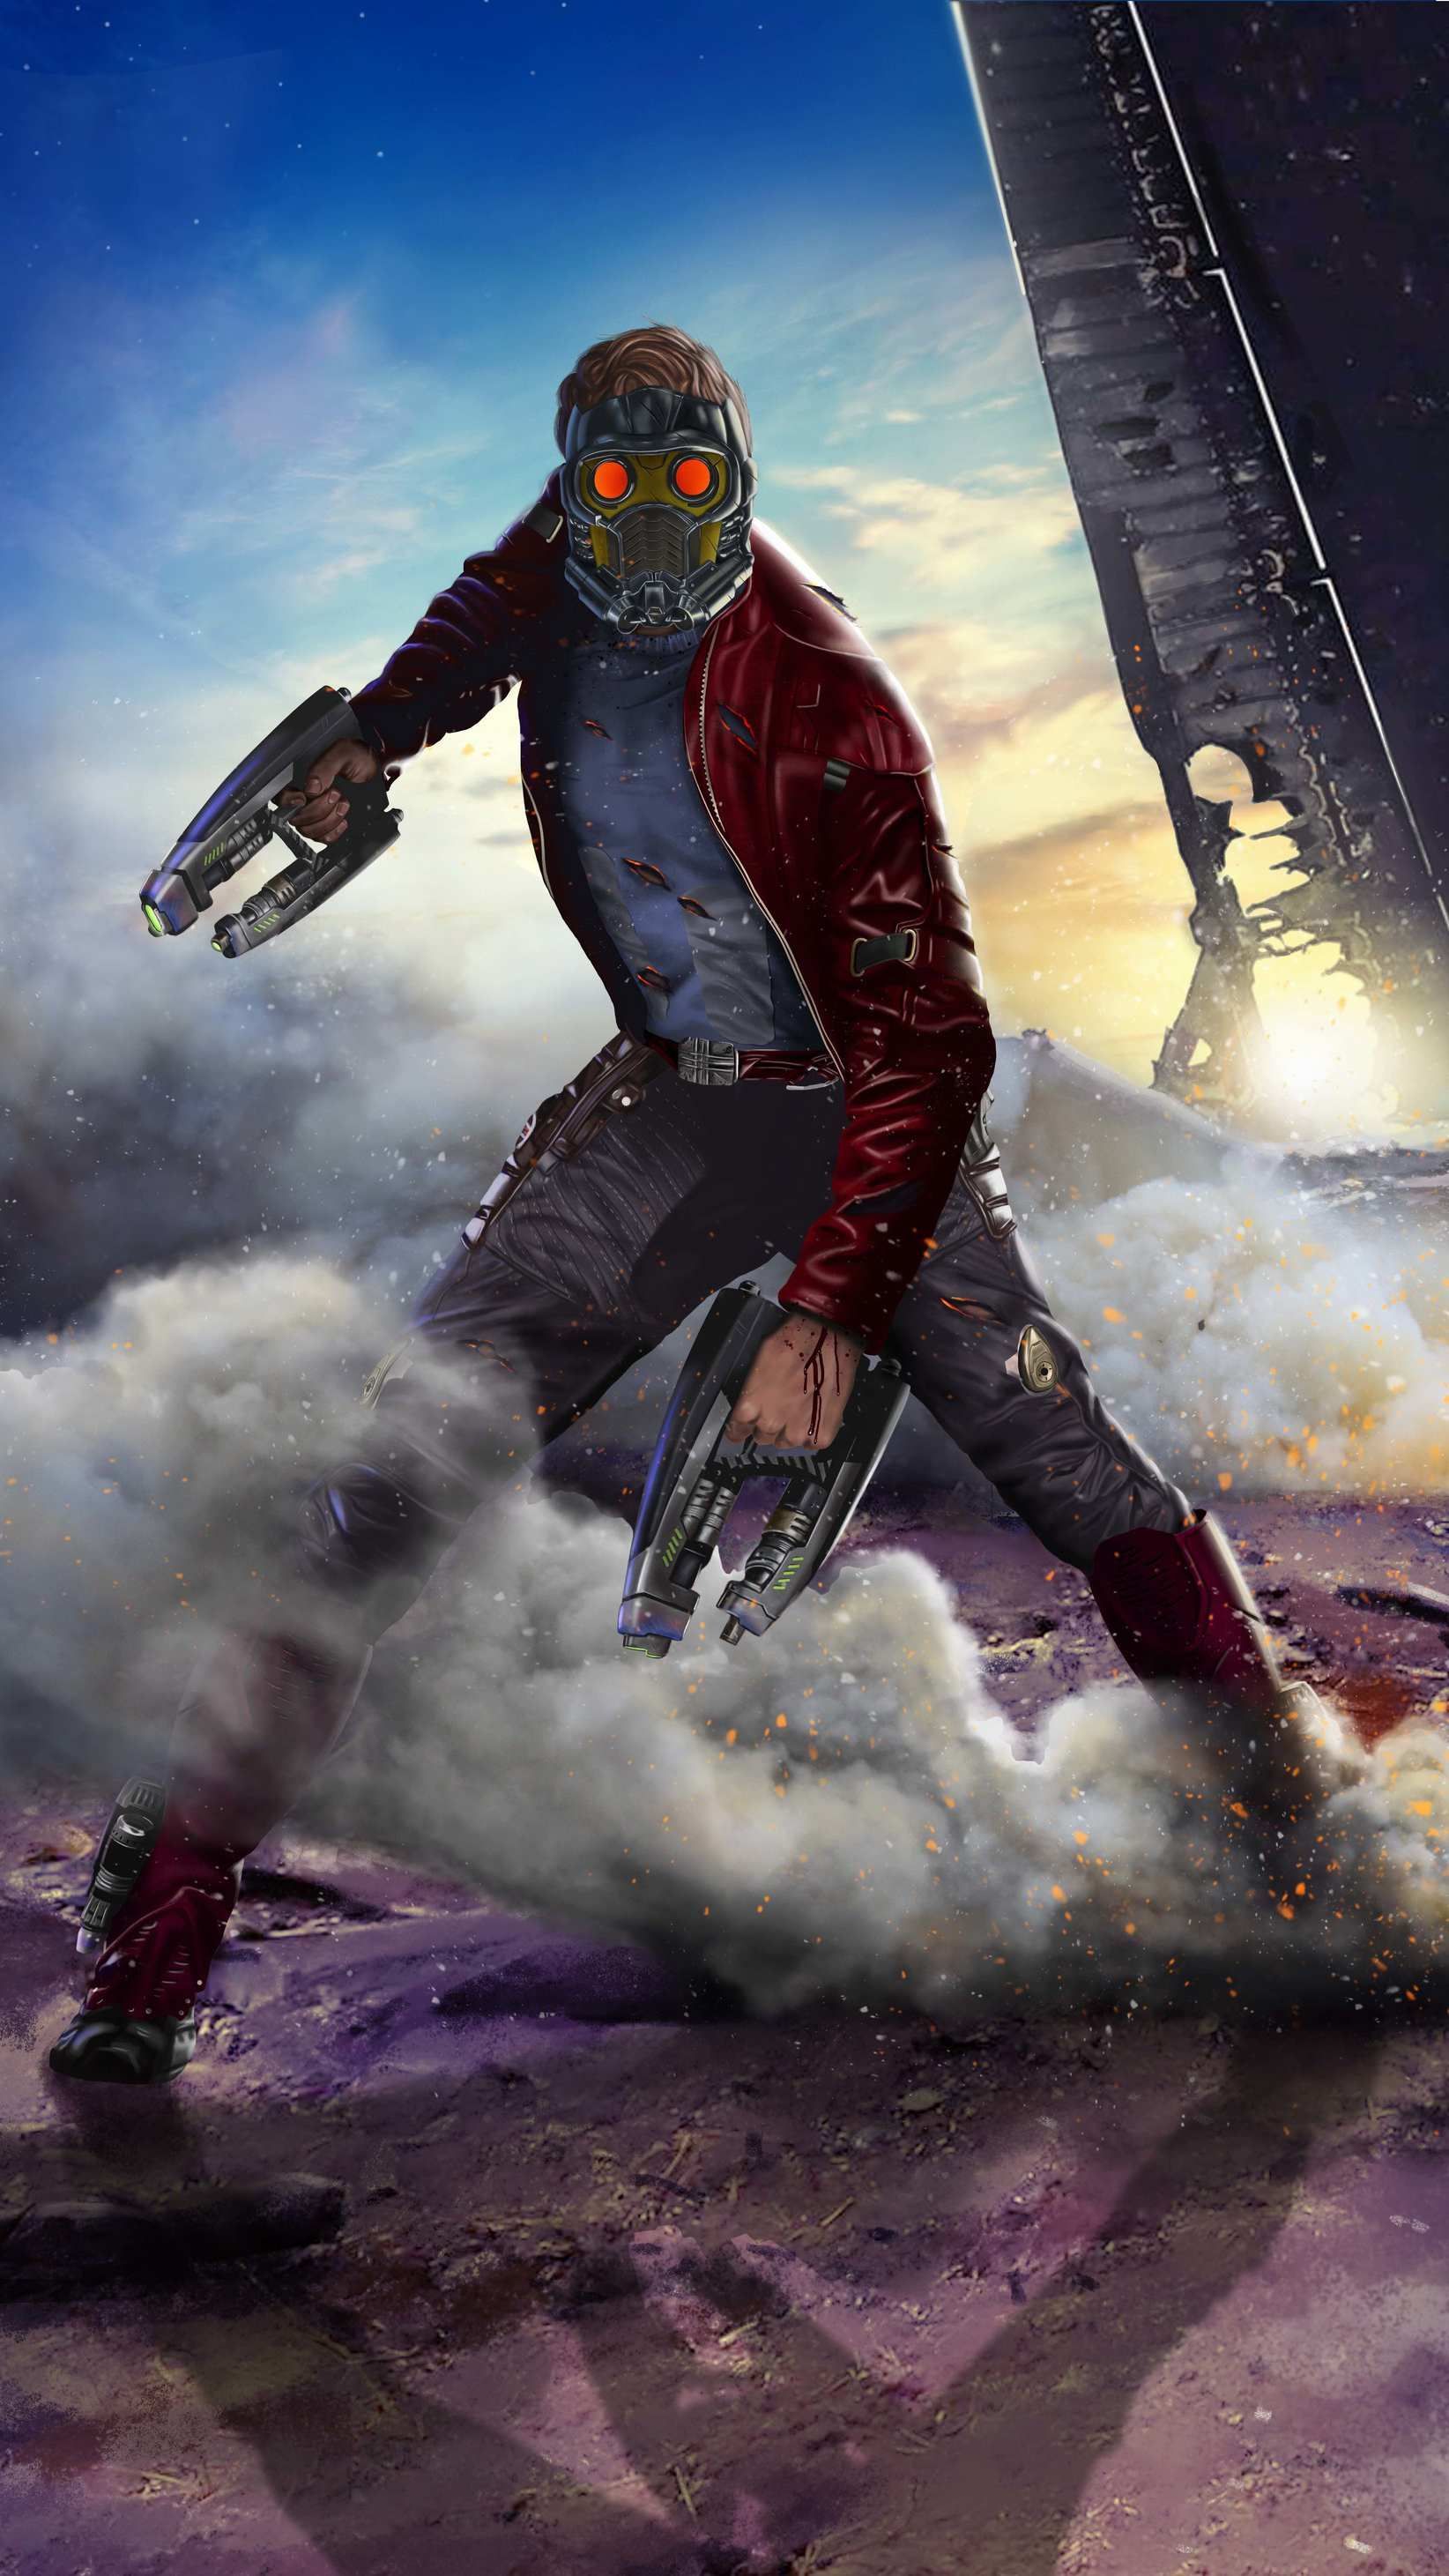 Guardians of the Galaxy Star Lord Wallpaper. Marvel superheroes, Guardians of the galaxy, Marvel characters